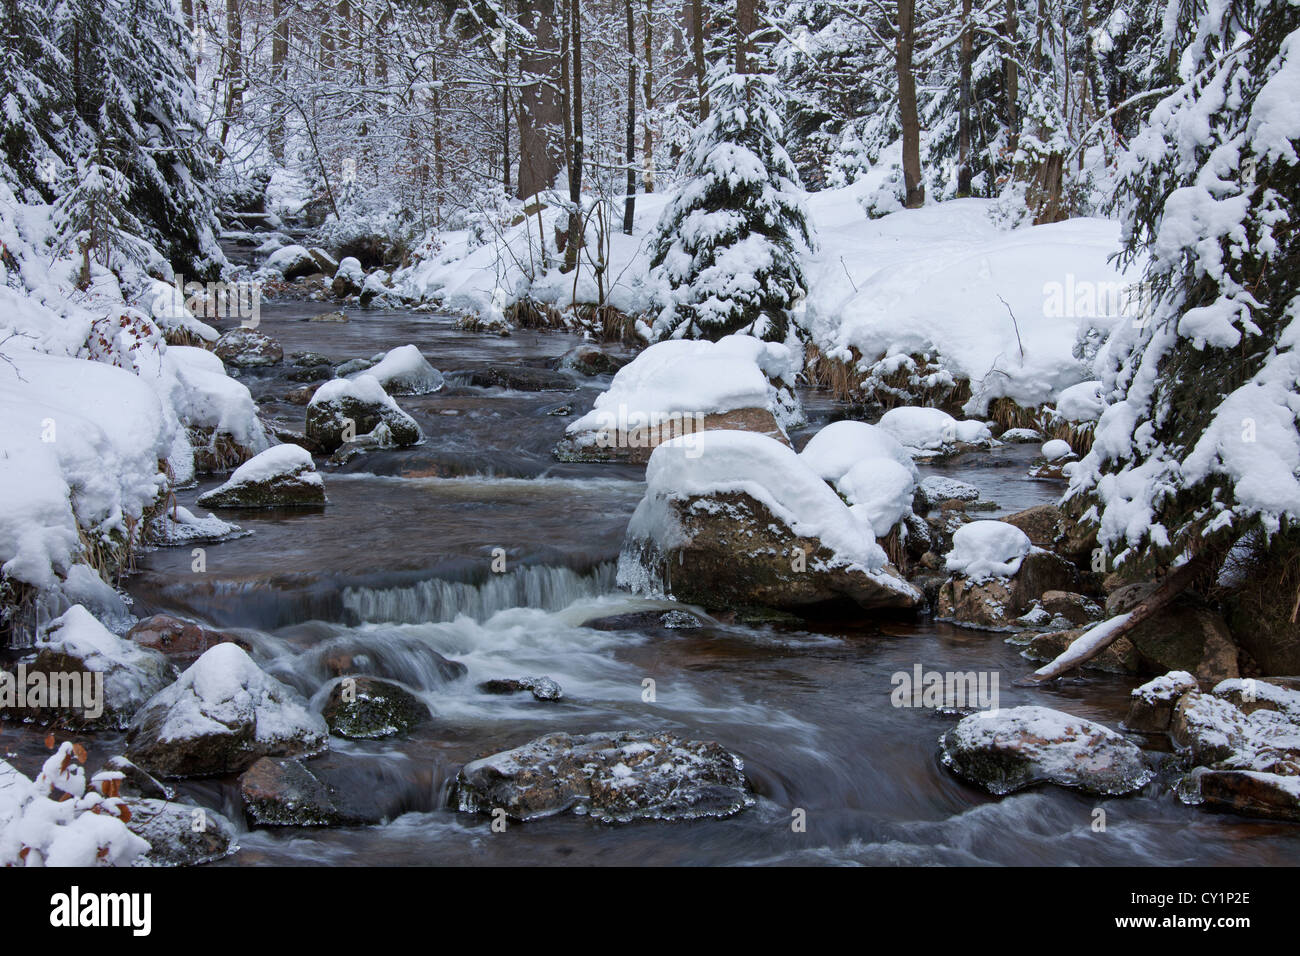 The Warme Bode river in the snow in winter in the Harz National Park, Germany Stock Photo